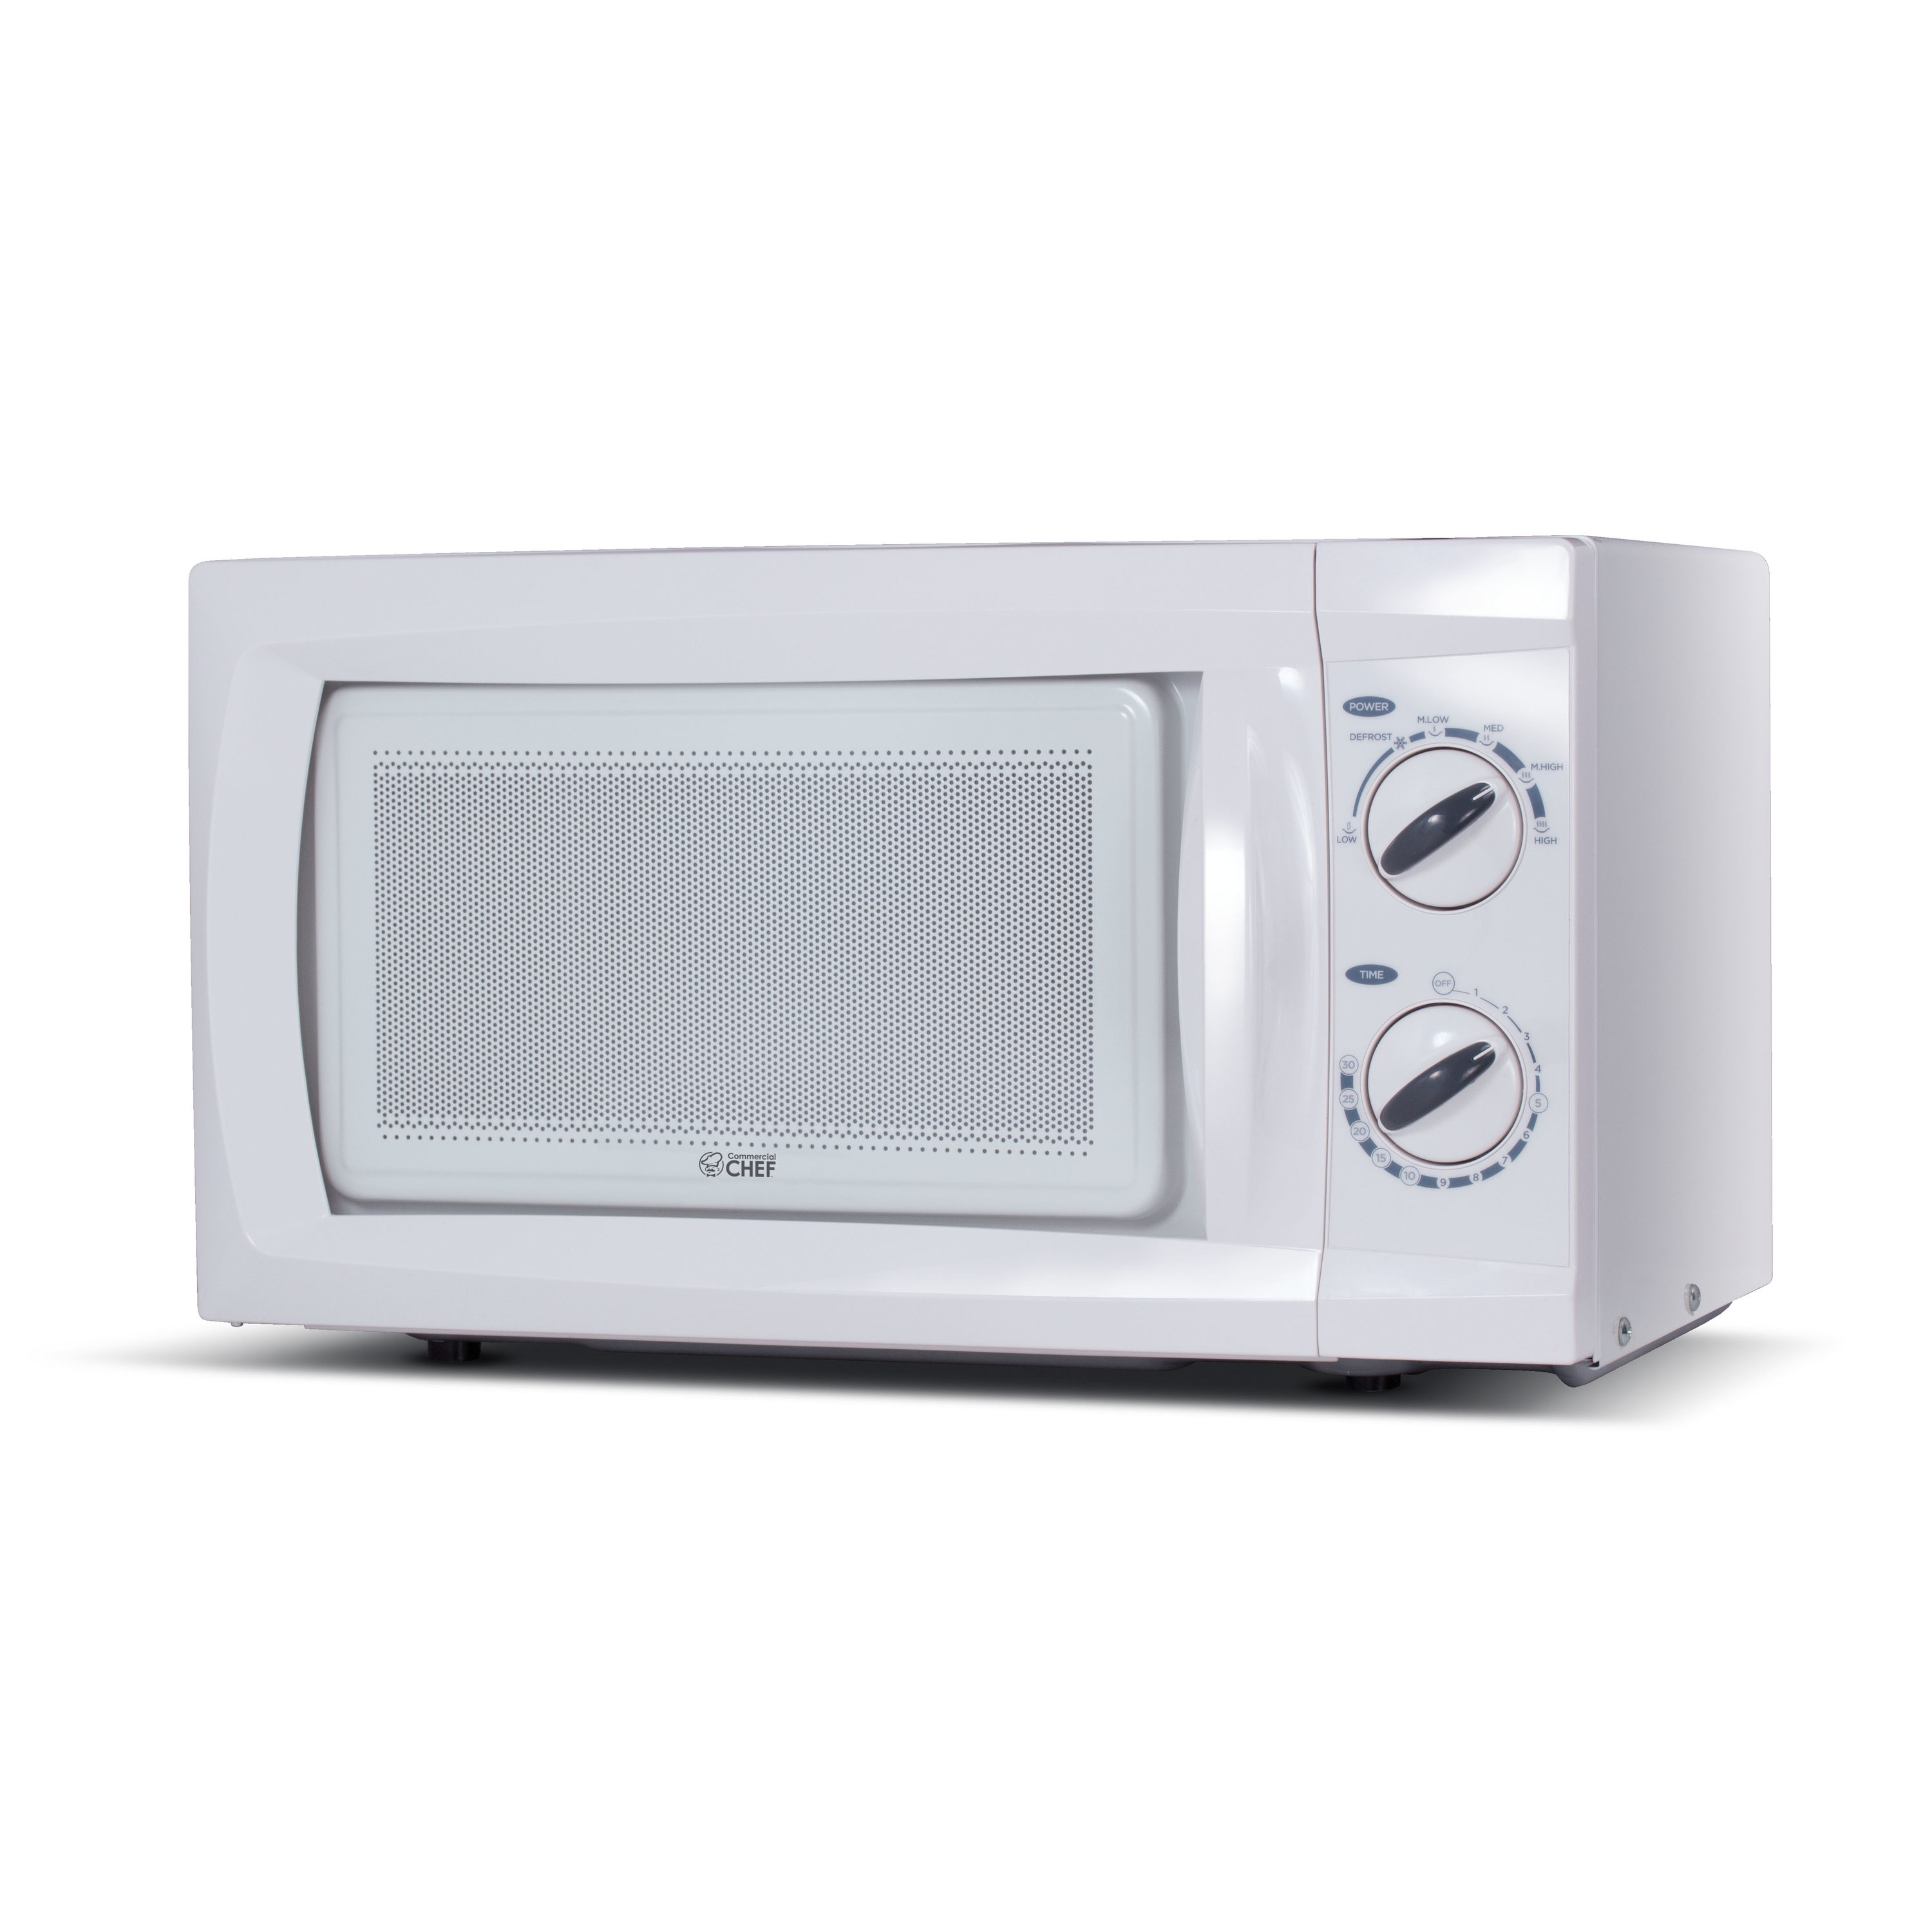 Commercial Chef 0.7 Cu. ft. Countertop Microwave Oven, Black